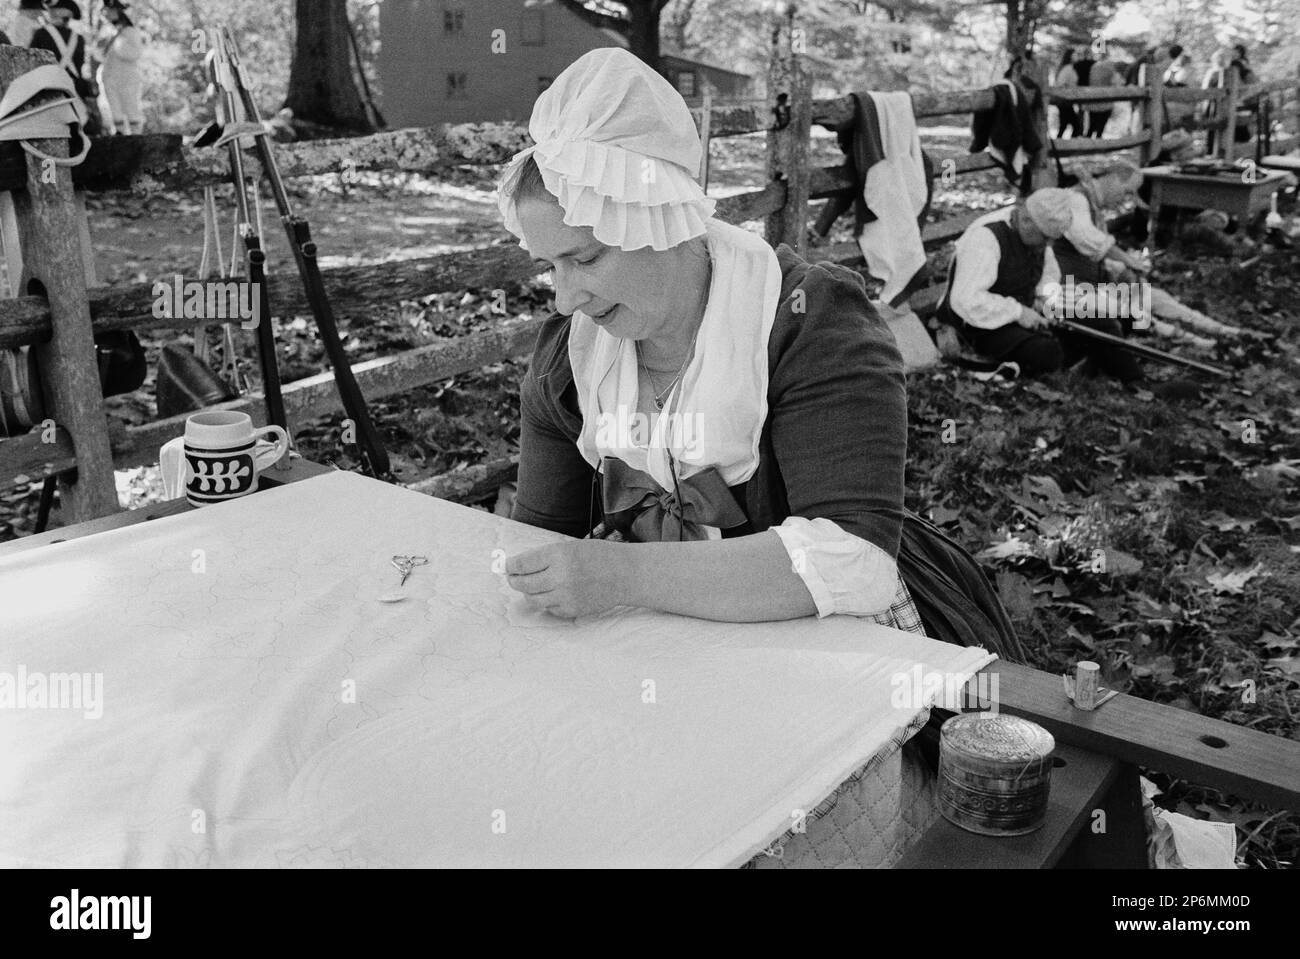 An actress in period clothing works on sewing a complex quilt outdoors while awaiting a battle  during a Revolutionary War reenactment at the Rebecca Stock Photo